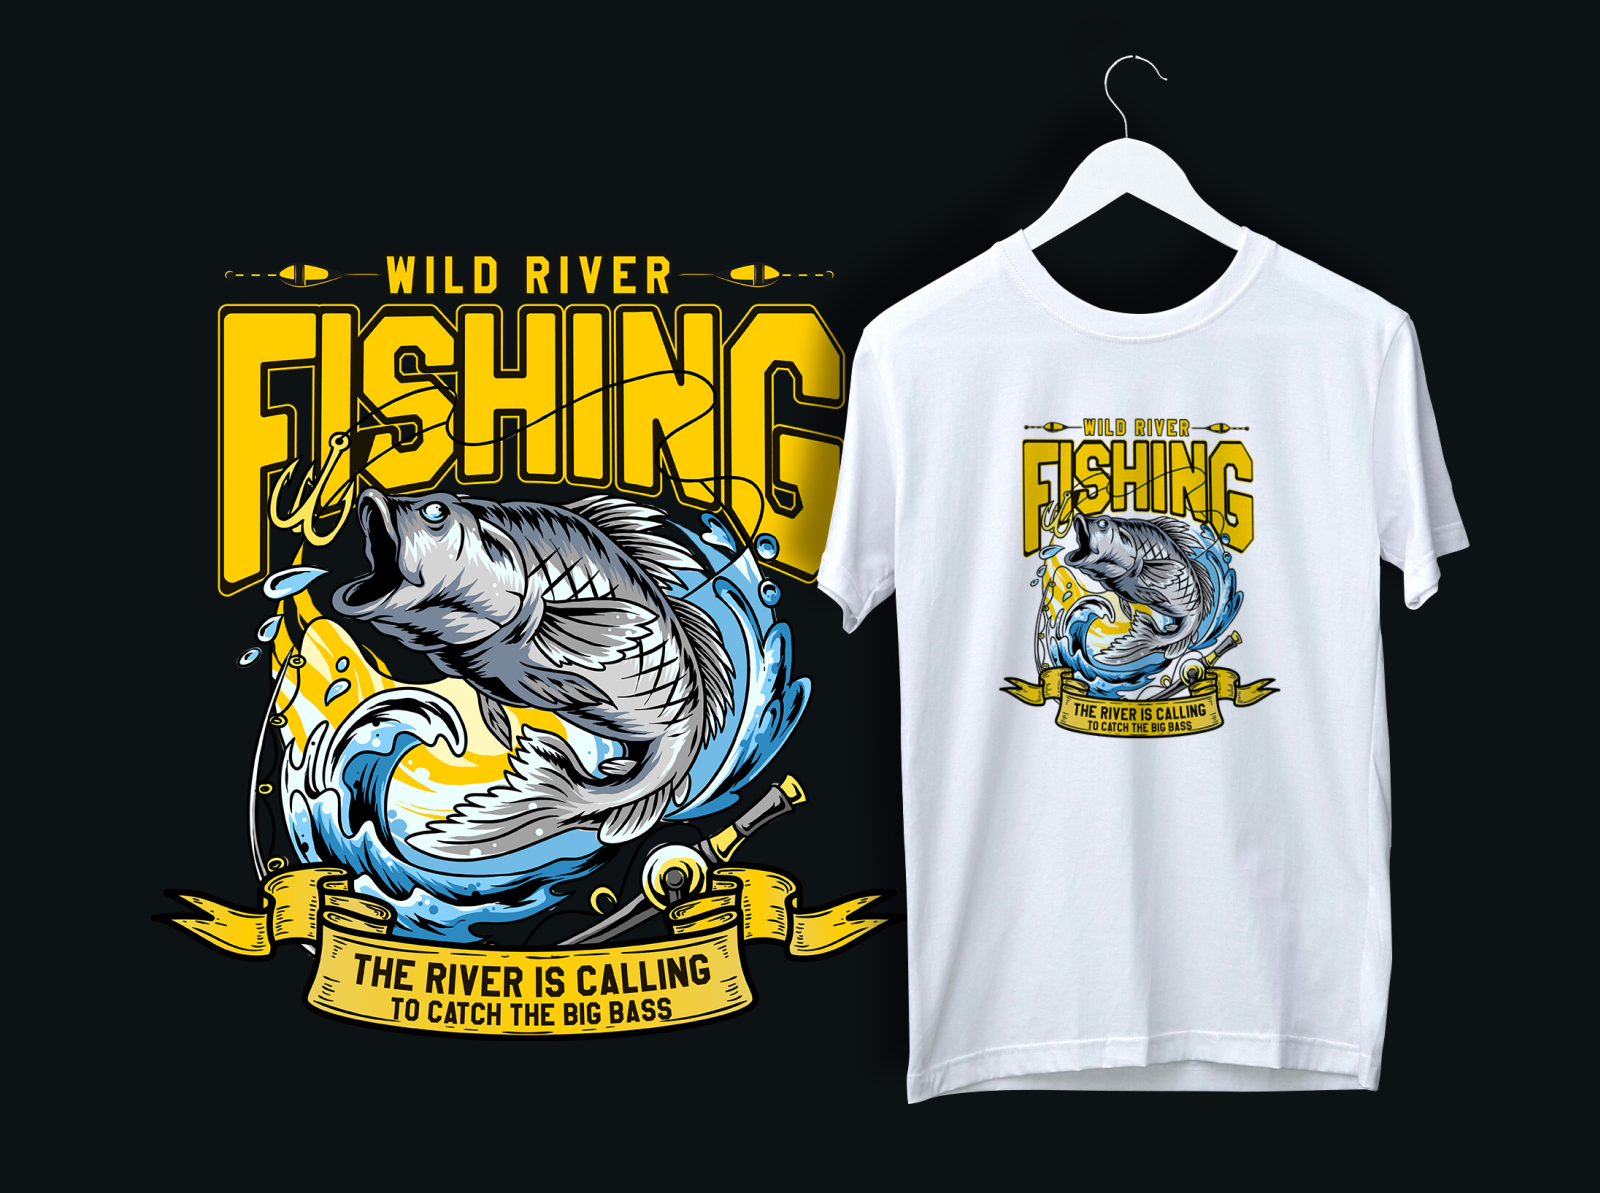 Perioperativ periode vest dyr Fishing T-shirt Design by Rezaul Islam on Dribbble